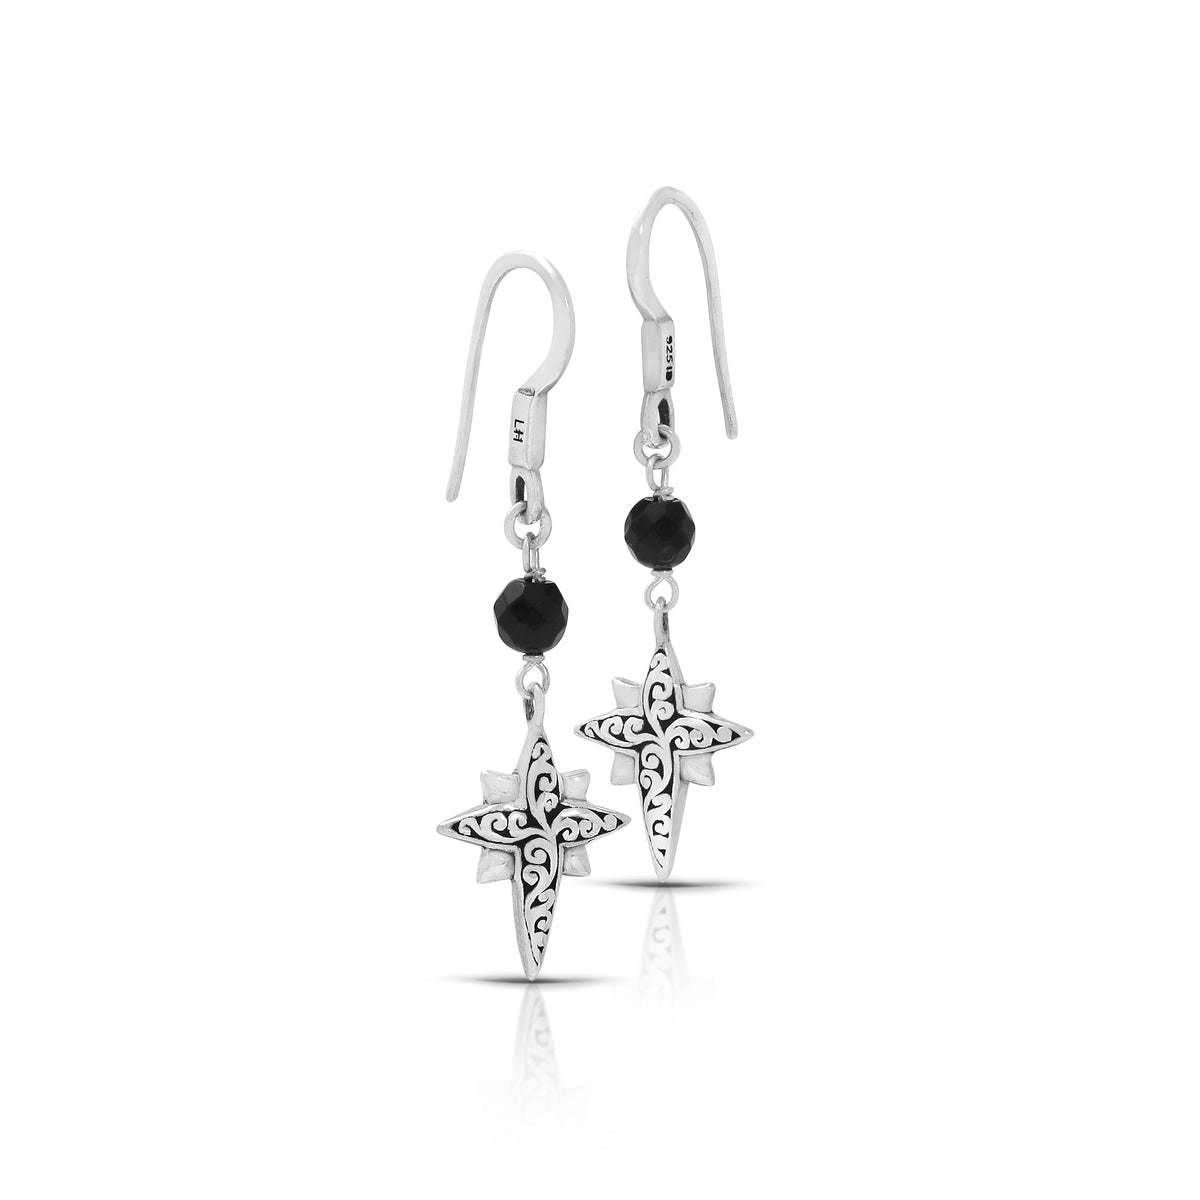 Black Onyx (4mm) Beads with Starbright Charm Earrings